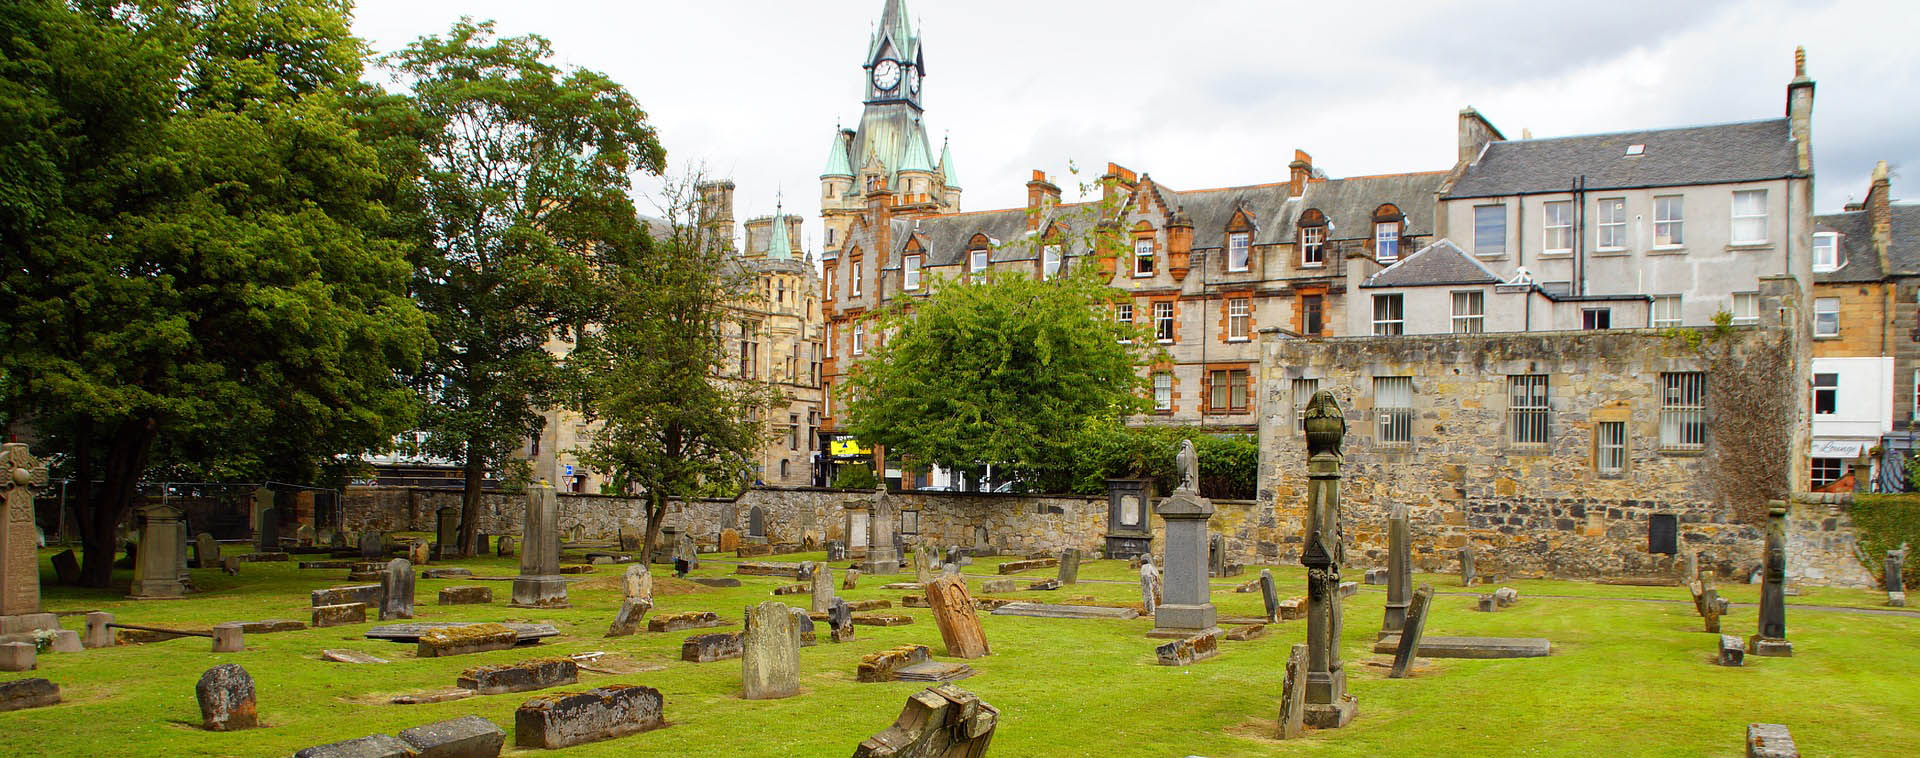 Quirky Treasure Trails - Explore a real slice of Scottish history, hot on the Trail of Robert the Bruce!